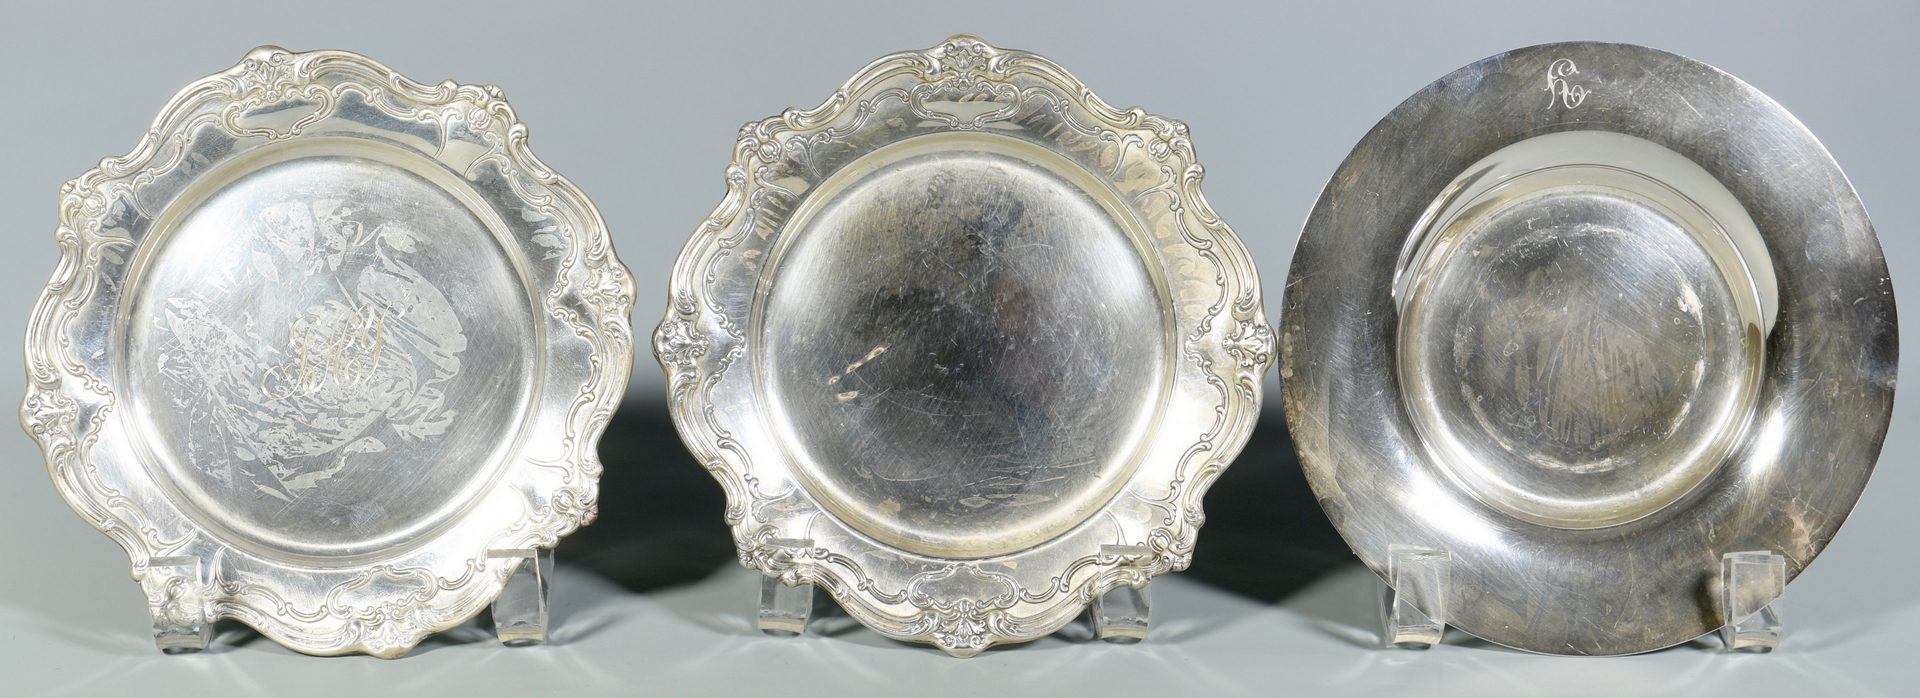 Lot 855: 13 assorted Sterling Plates and Trays